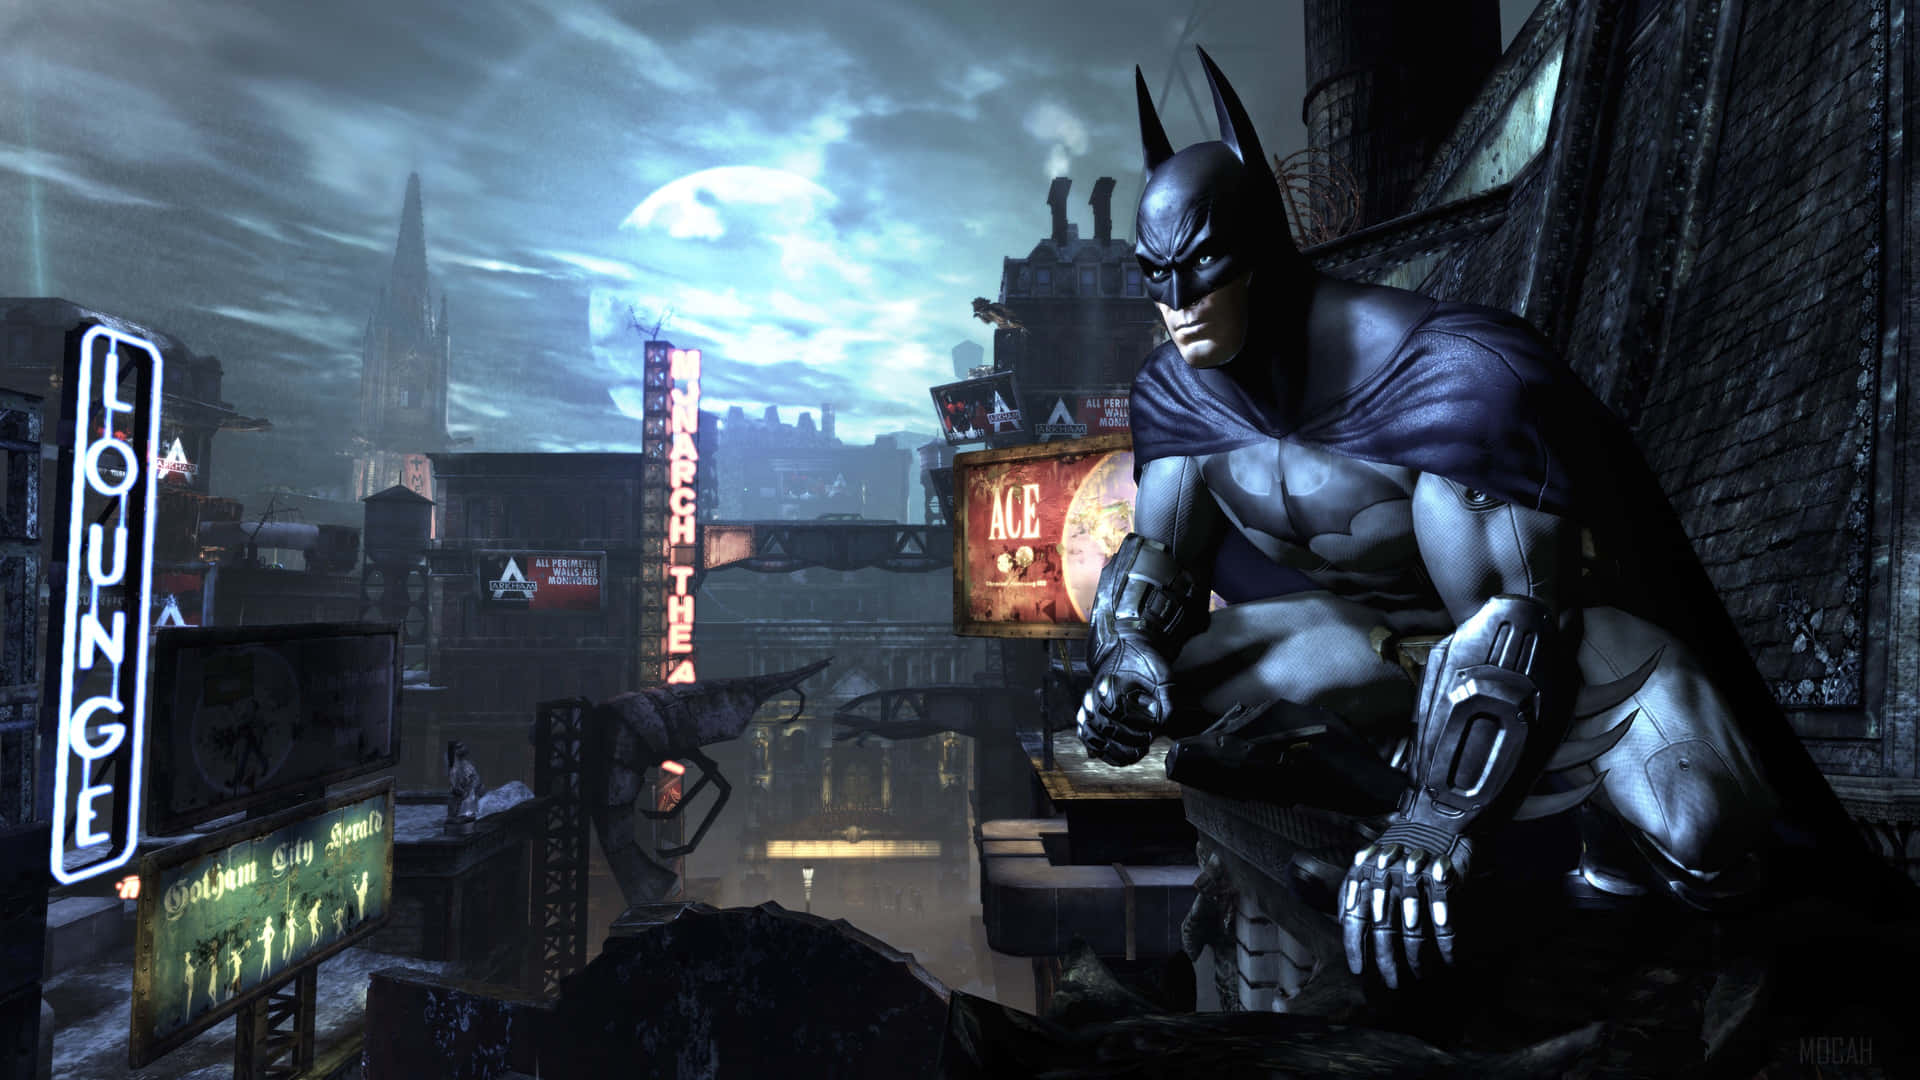 Welcome to Batman City - the Home of the Dark Knight! Wallpaper